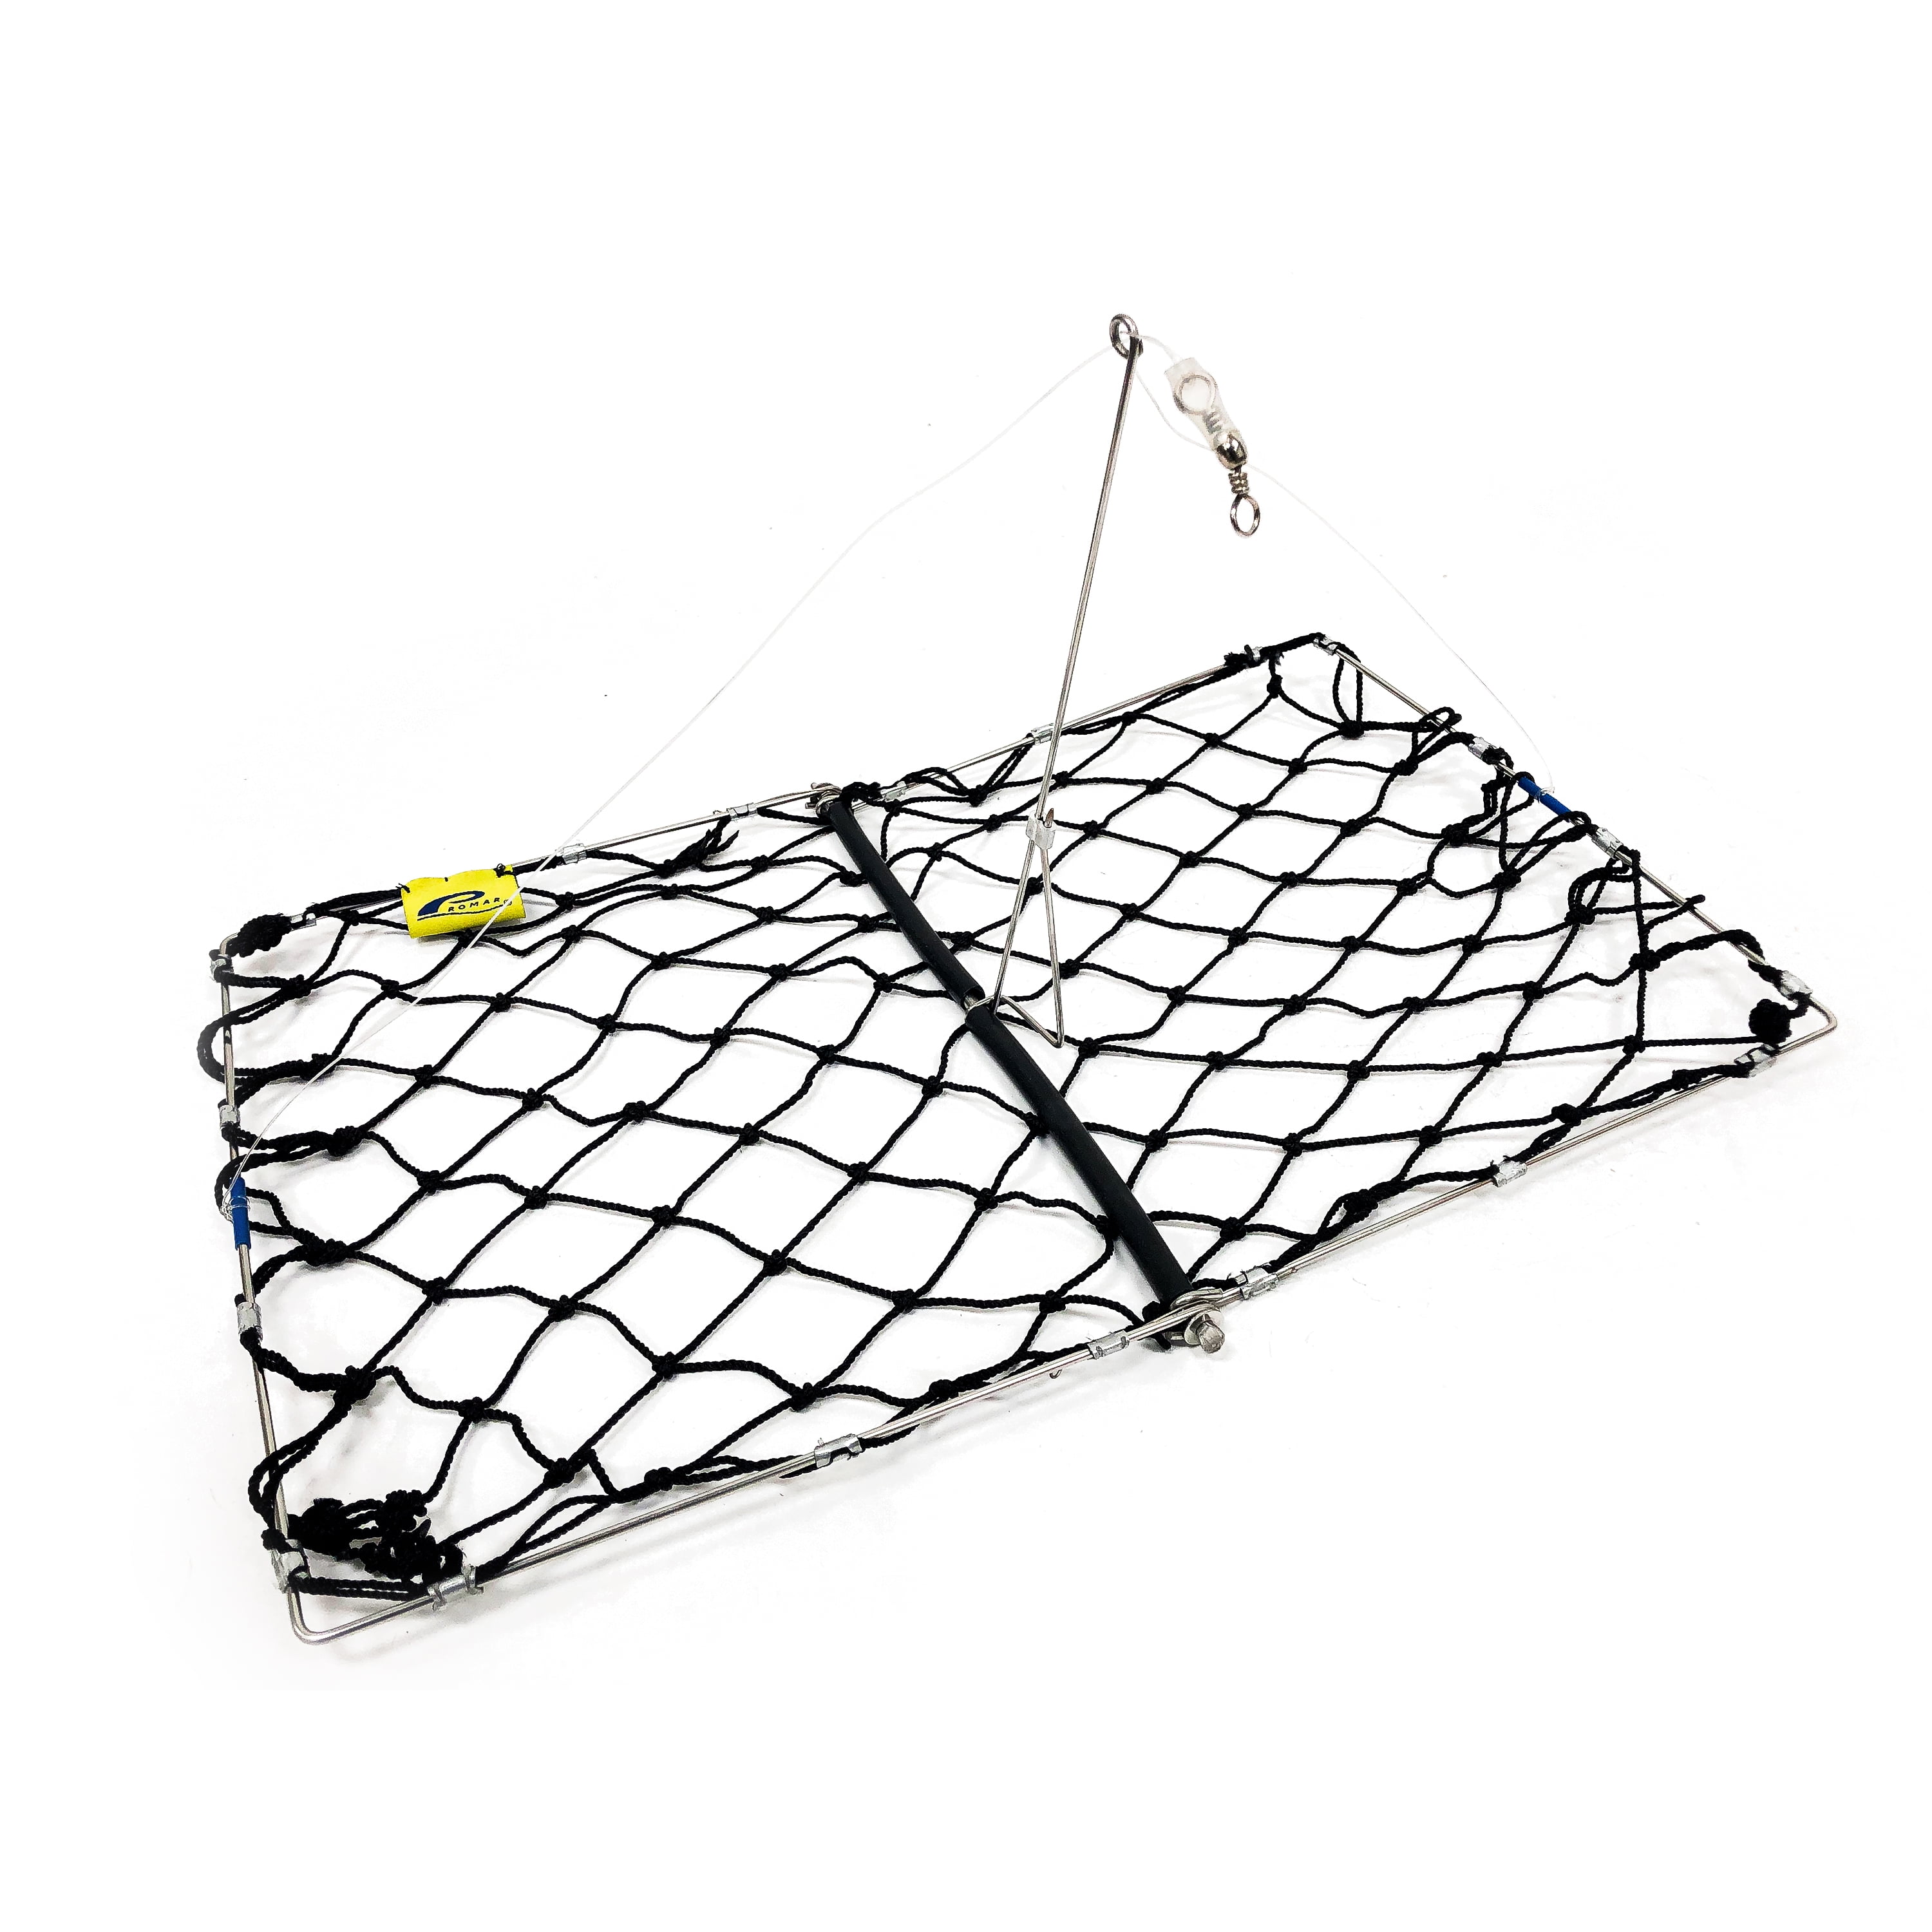 Promar Weighted Crab Snare Trap